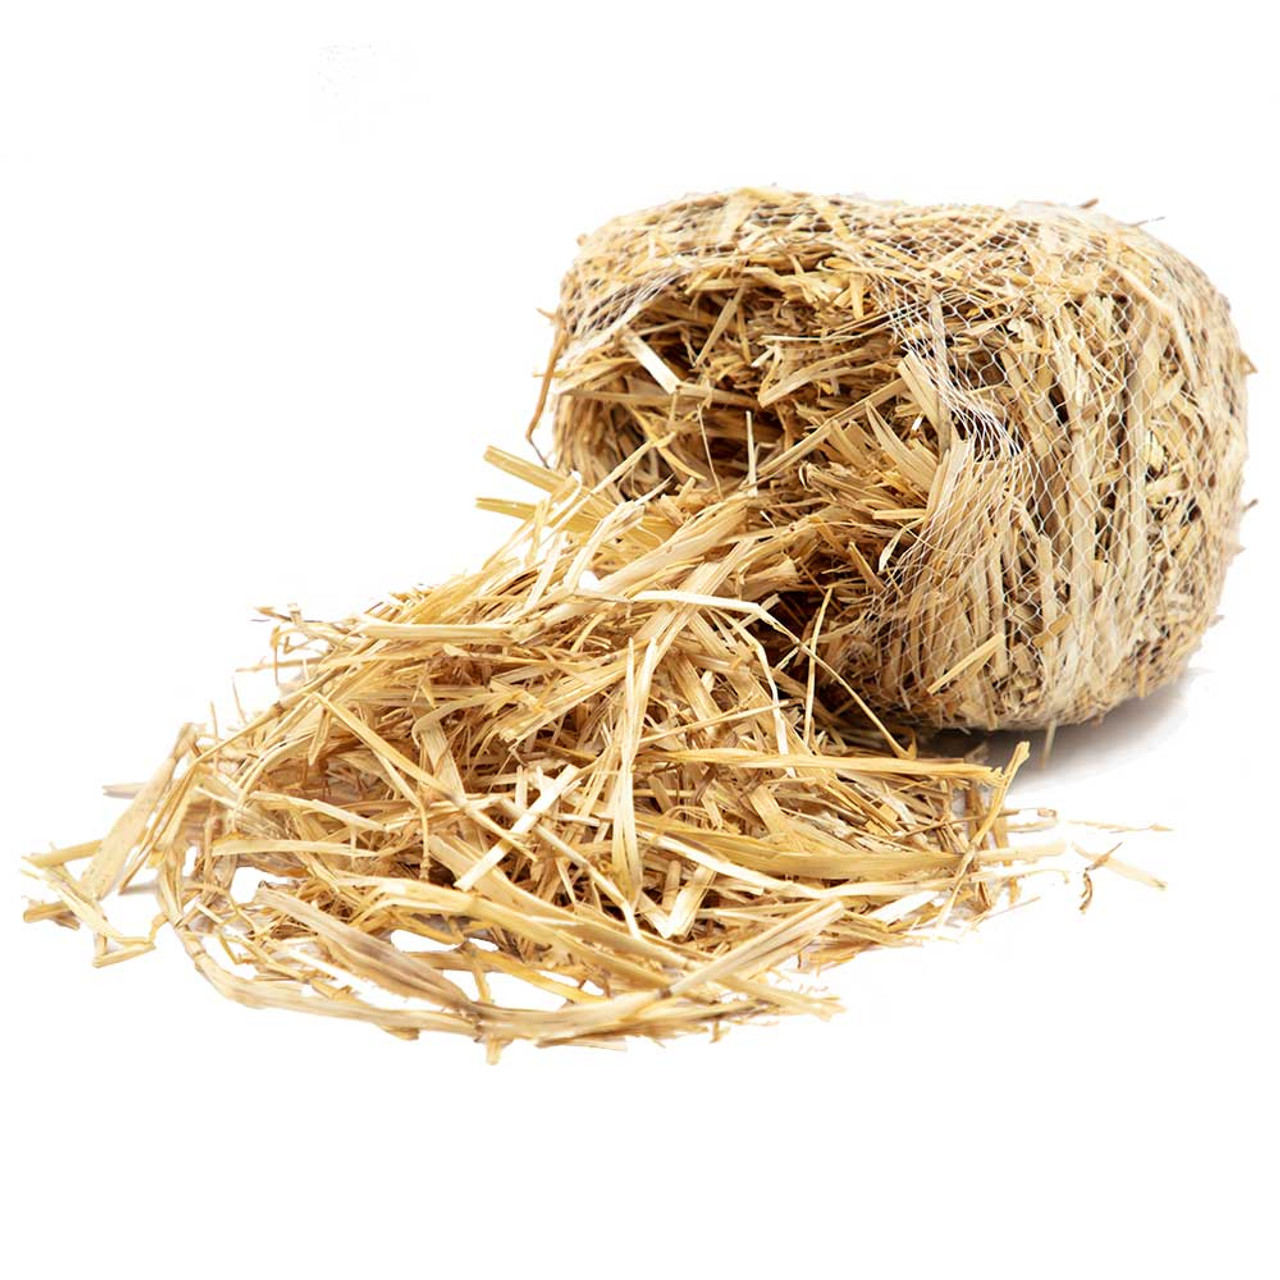 Summit Barley Straw Super Bale - treats up to 5,000 Gallons